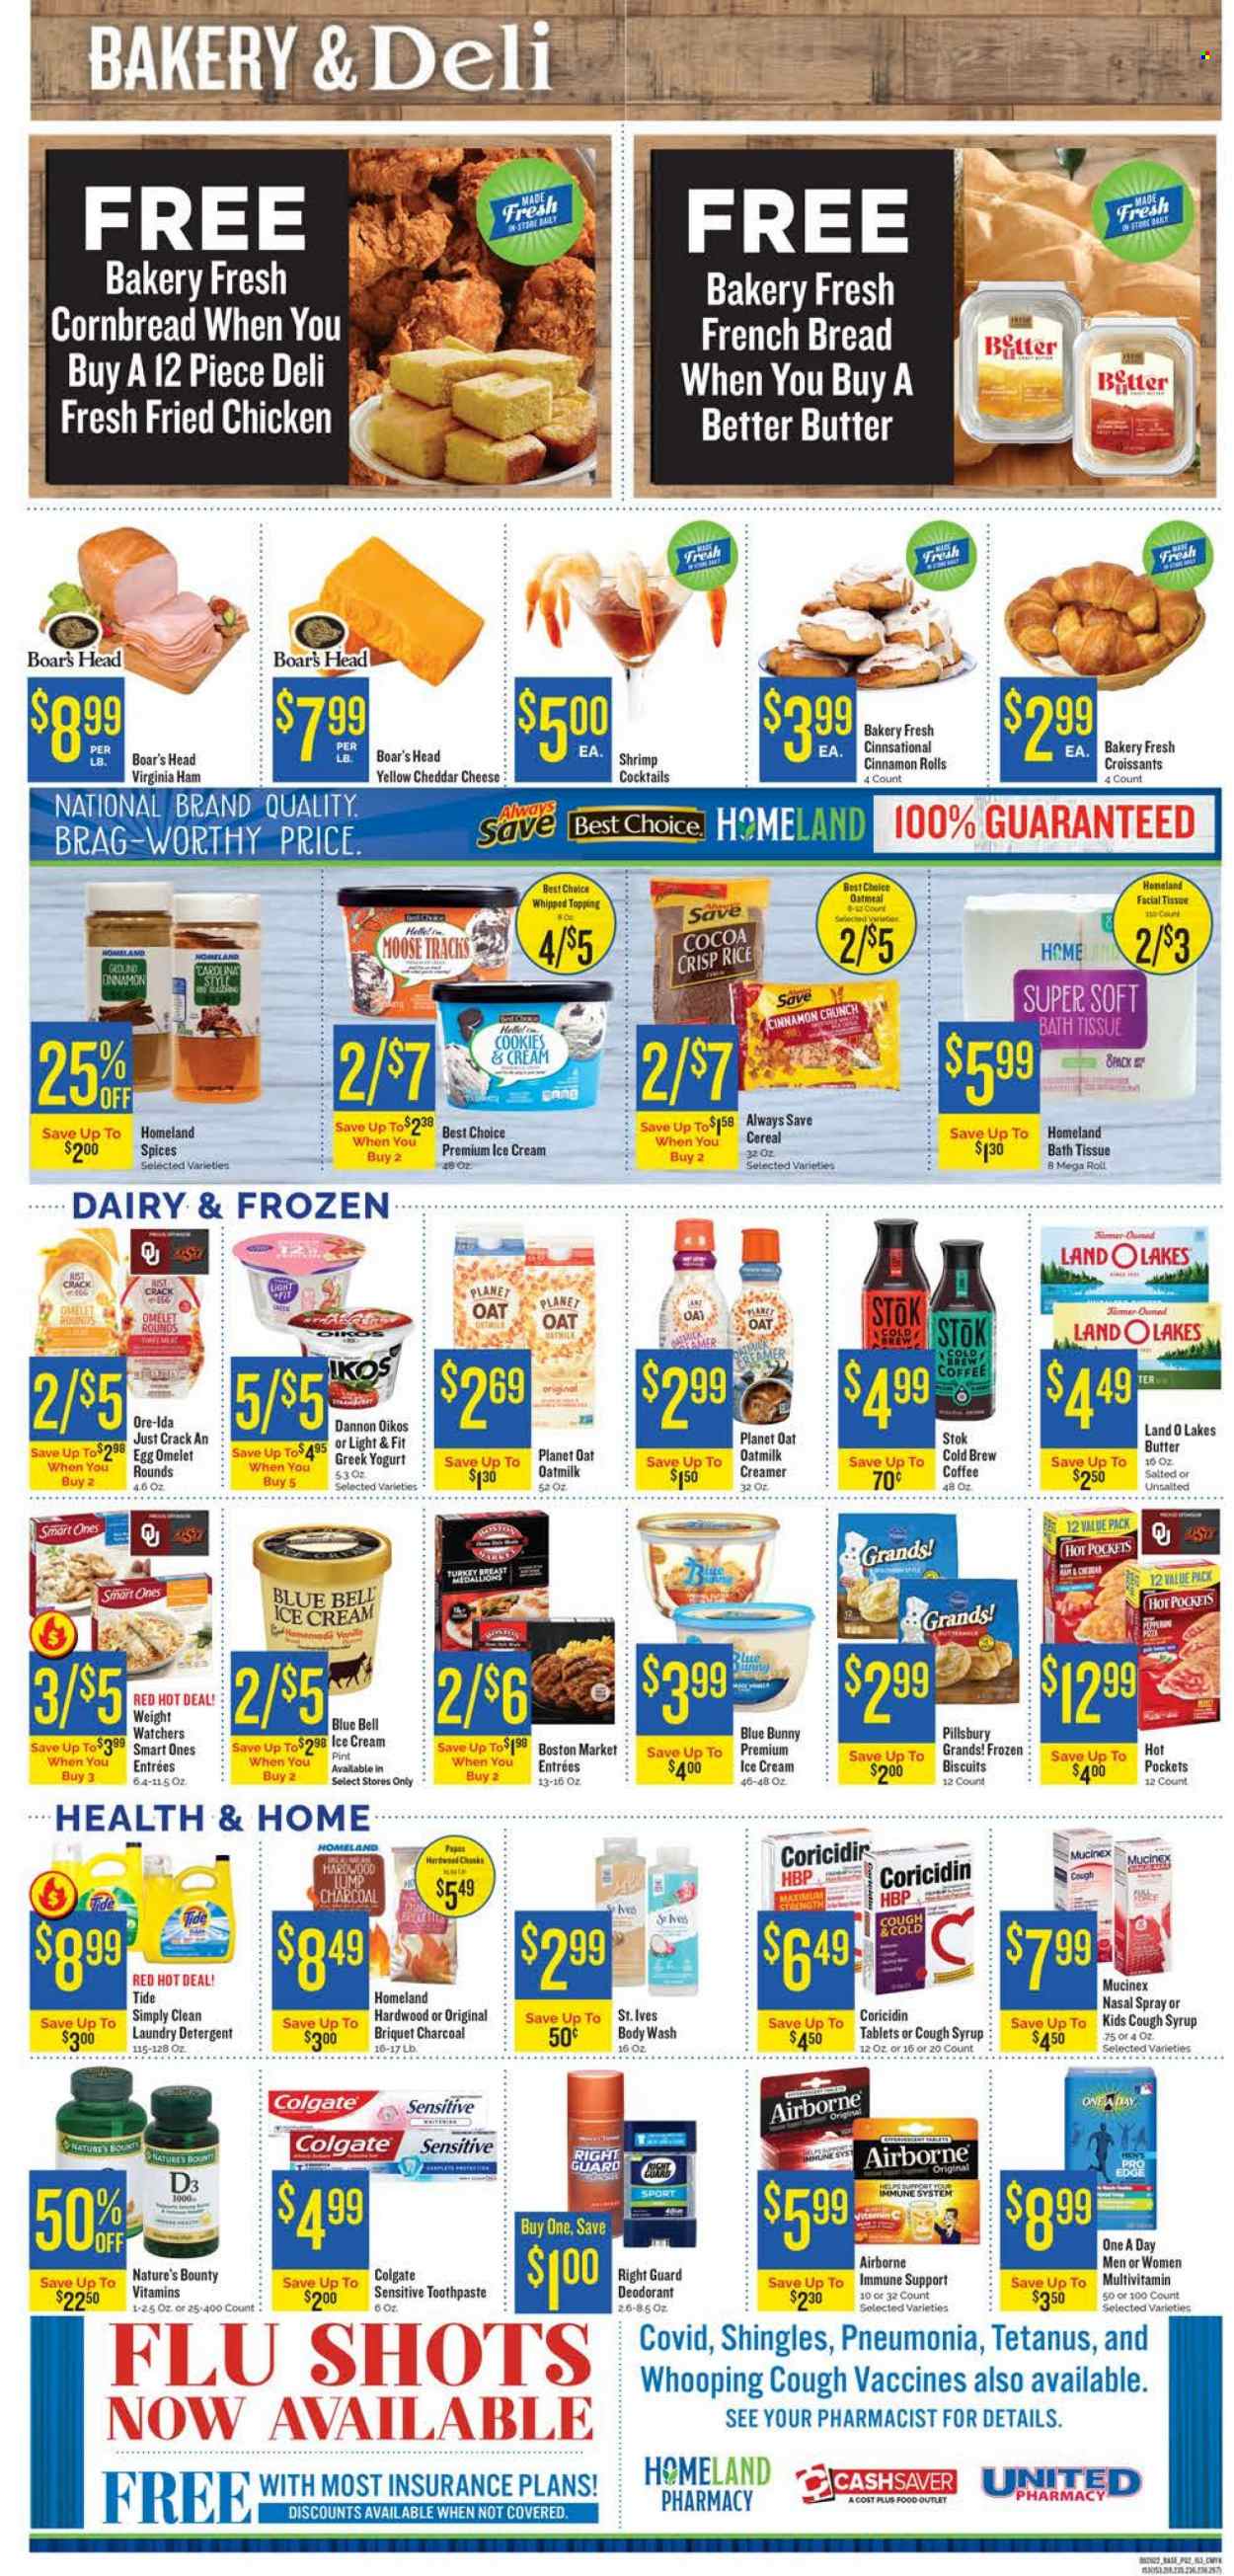 thumbnail - Homeland Flyer - 09/28/2022 - 10/04/2022 - Sales products - bread, corn bread, croissant, french bread, cinnamon roll, shrimps, ramen, hot pocket, fried chicken, Pillsbury, ham, virginia ham, cheddar, cheese, greek yoghurt, yoghurt, Oikos, Dannon, oat milk, butter, creamer, ice cream, Blue Bell, Blue Bunny, Ore-Ida, cookies, biscuit, cocoa, oatmeal, topping, cereals, rice, syrup, coffee, turkey breast, bath tissue, detergent, Tide, laundry detergent, body wash, Colgate, toothpaste, anti-perspirant, deodorant, Coricidin, Mucinex, multivitamin, Nature's Bounty, vitamin D3, nasal spray. Page 2.